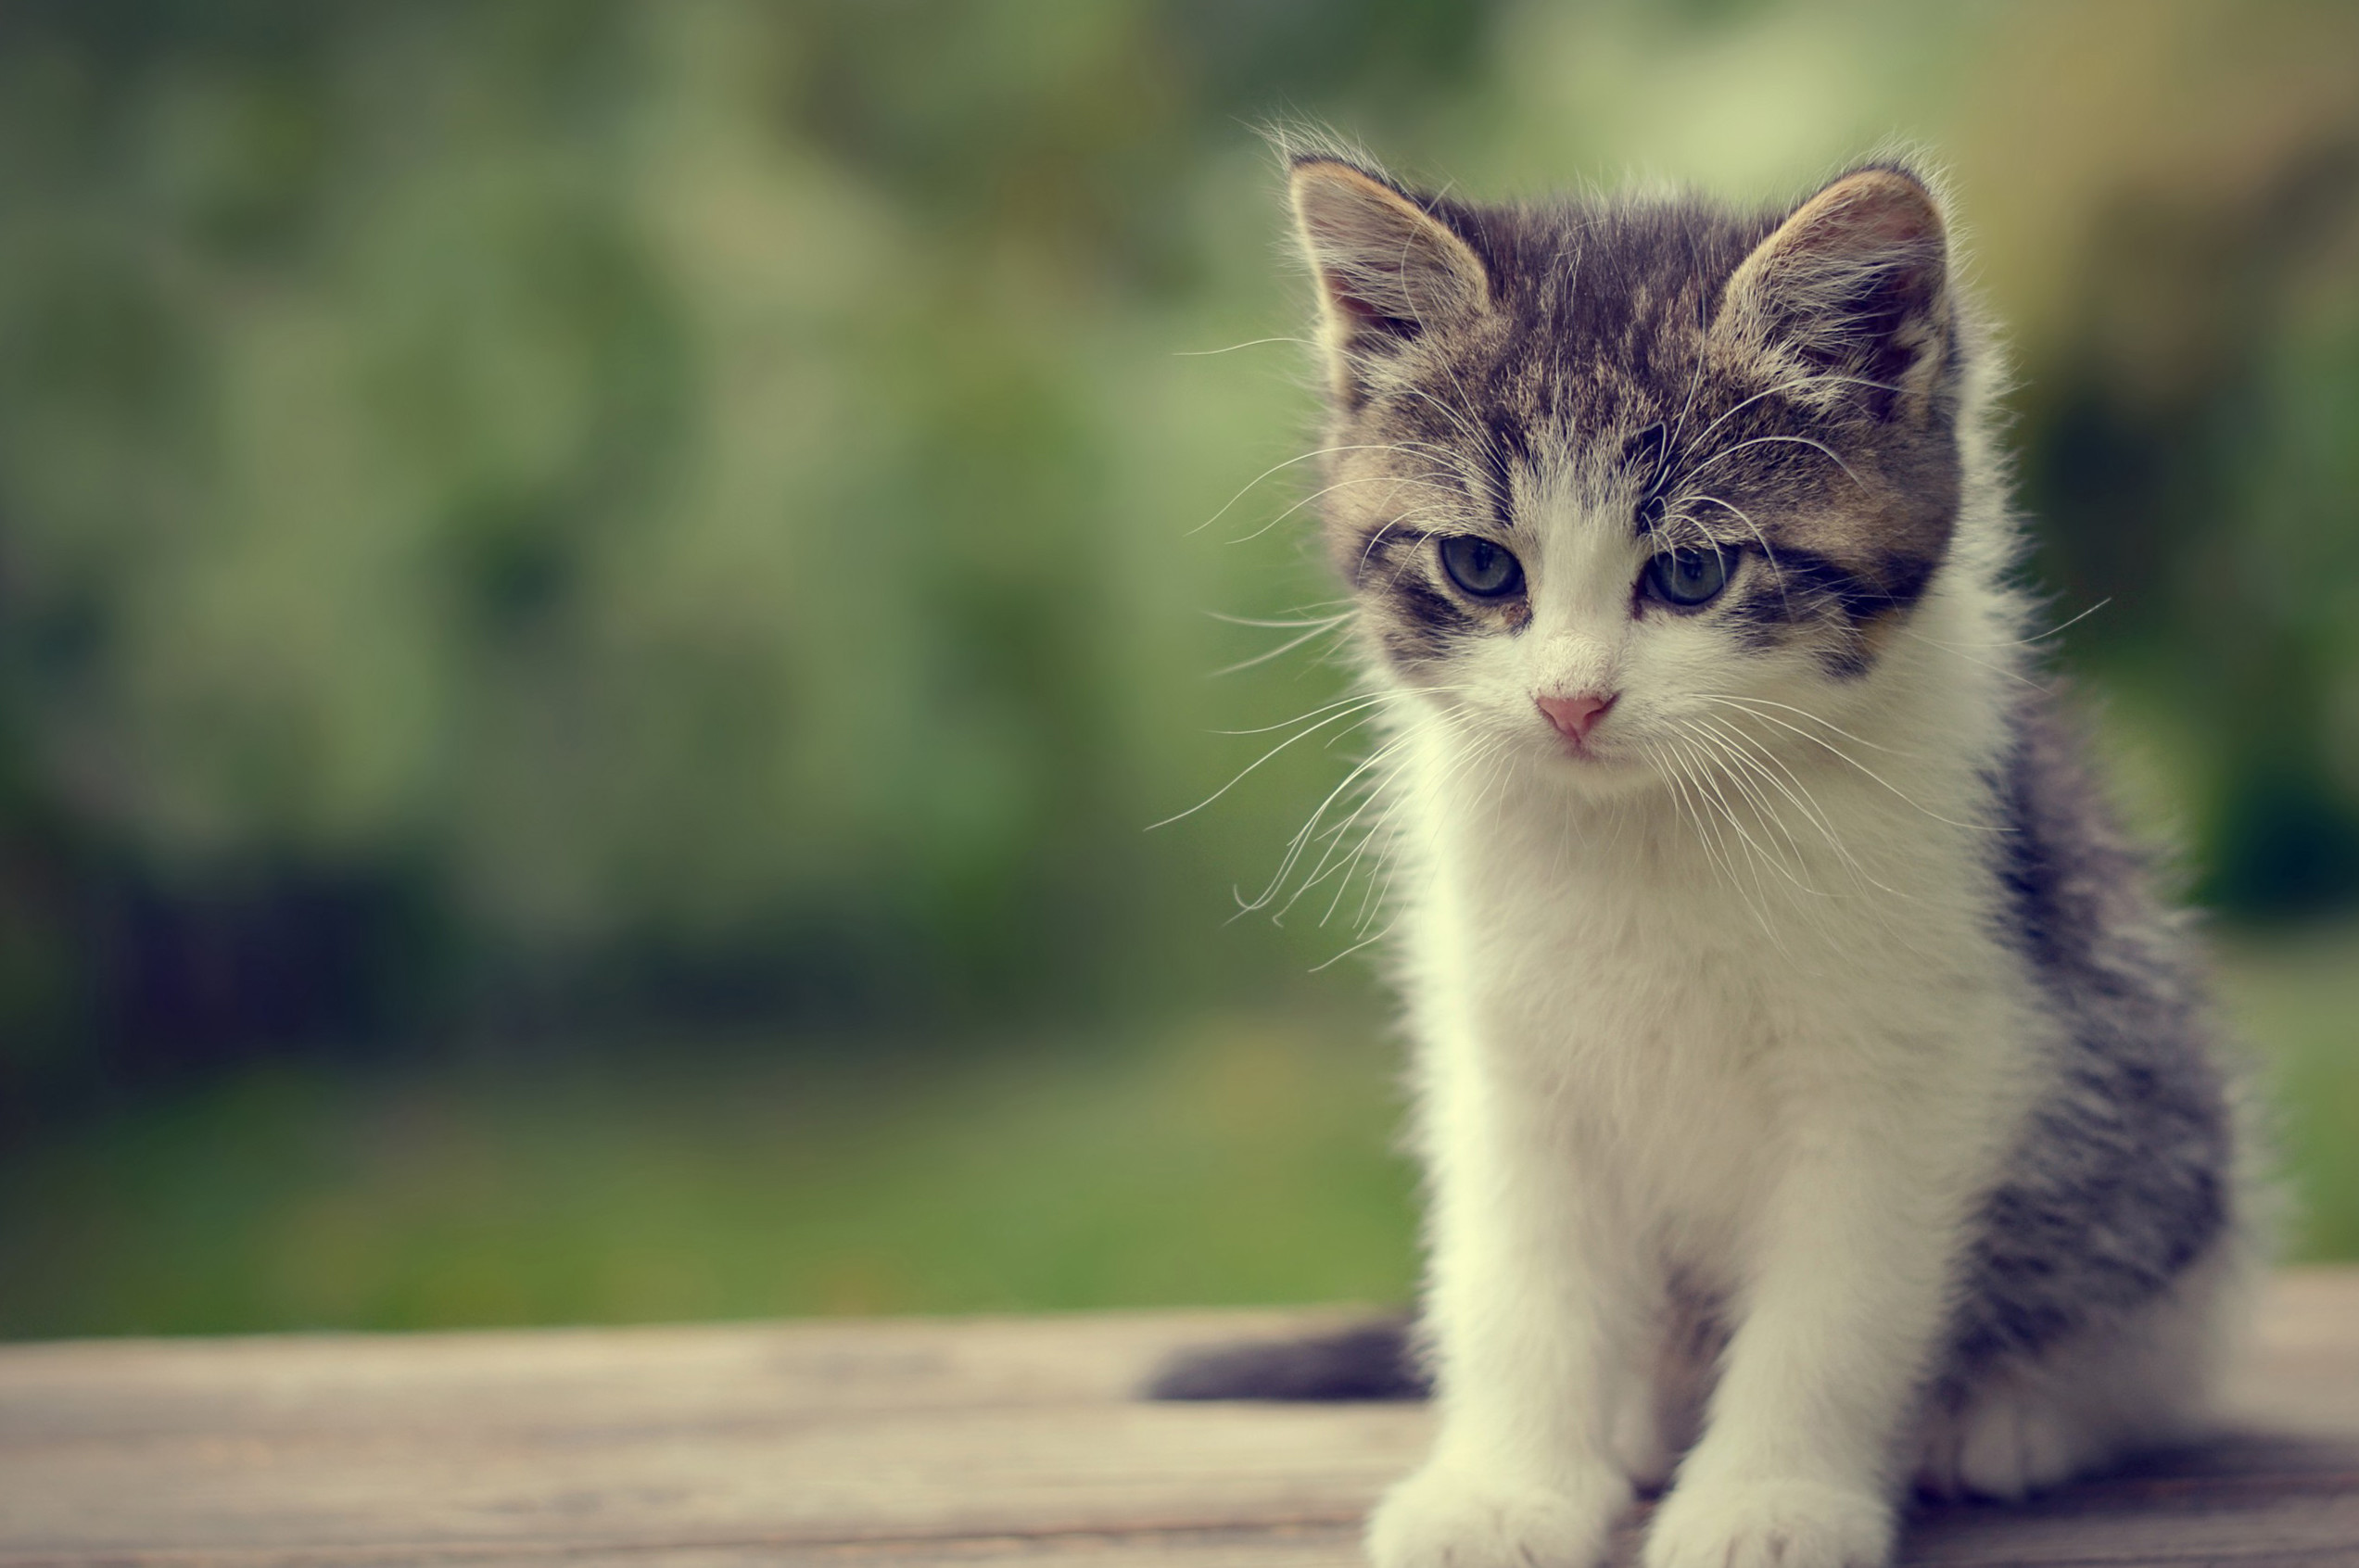 2545x1692 Hd Cat Wallpapers, Cute Cat Photos, Free Cat Images, Claw, Hairy,